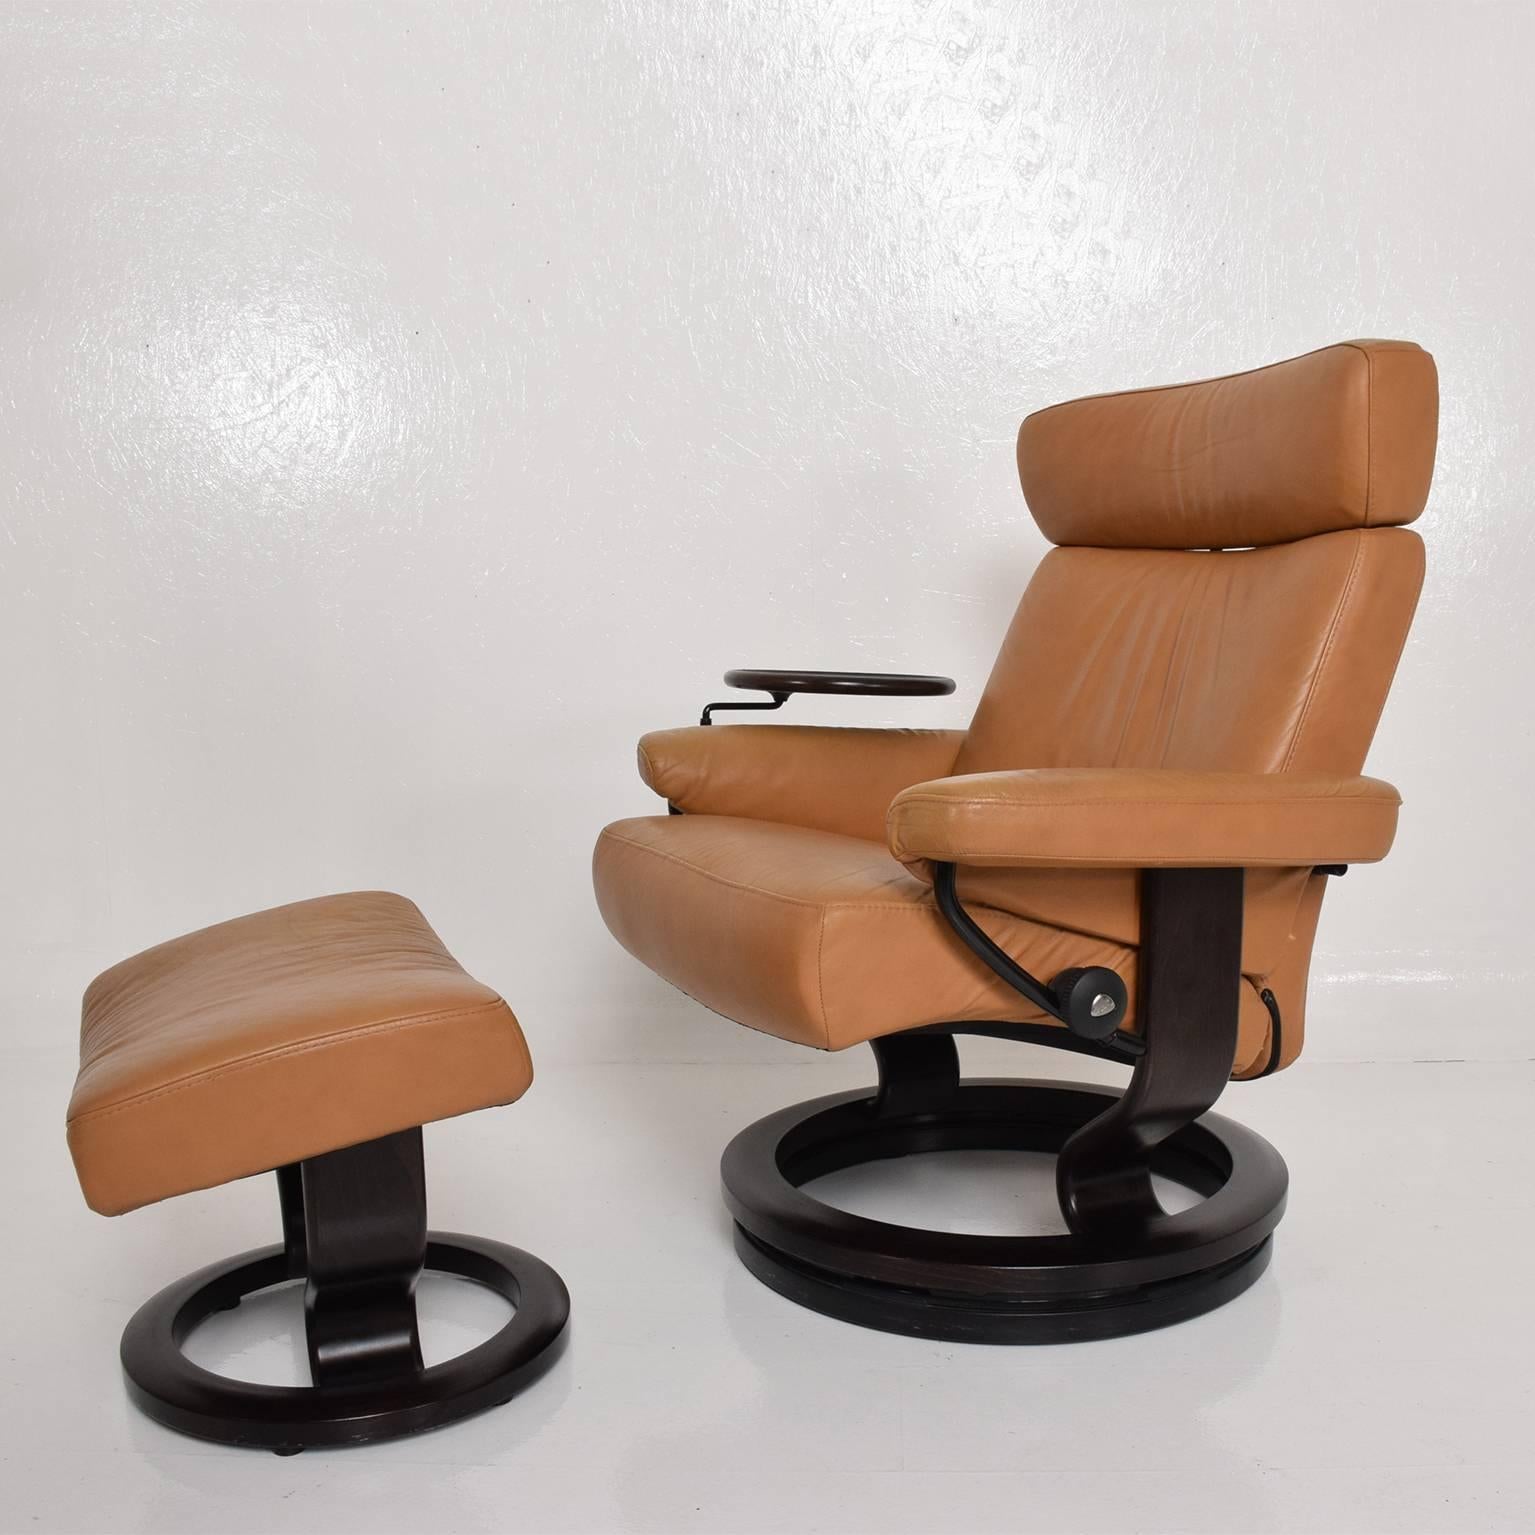 An Ekornes Stressless recliner with matching ottoman and service tray table. 
Camel color leather in very good condition. Dark wood base and round service table. 
Very comfortable ergonomic design. Made in Norway circa 2000
Two chairs are available,